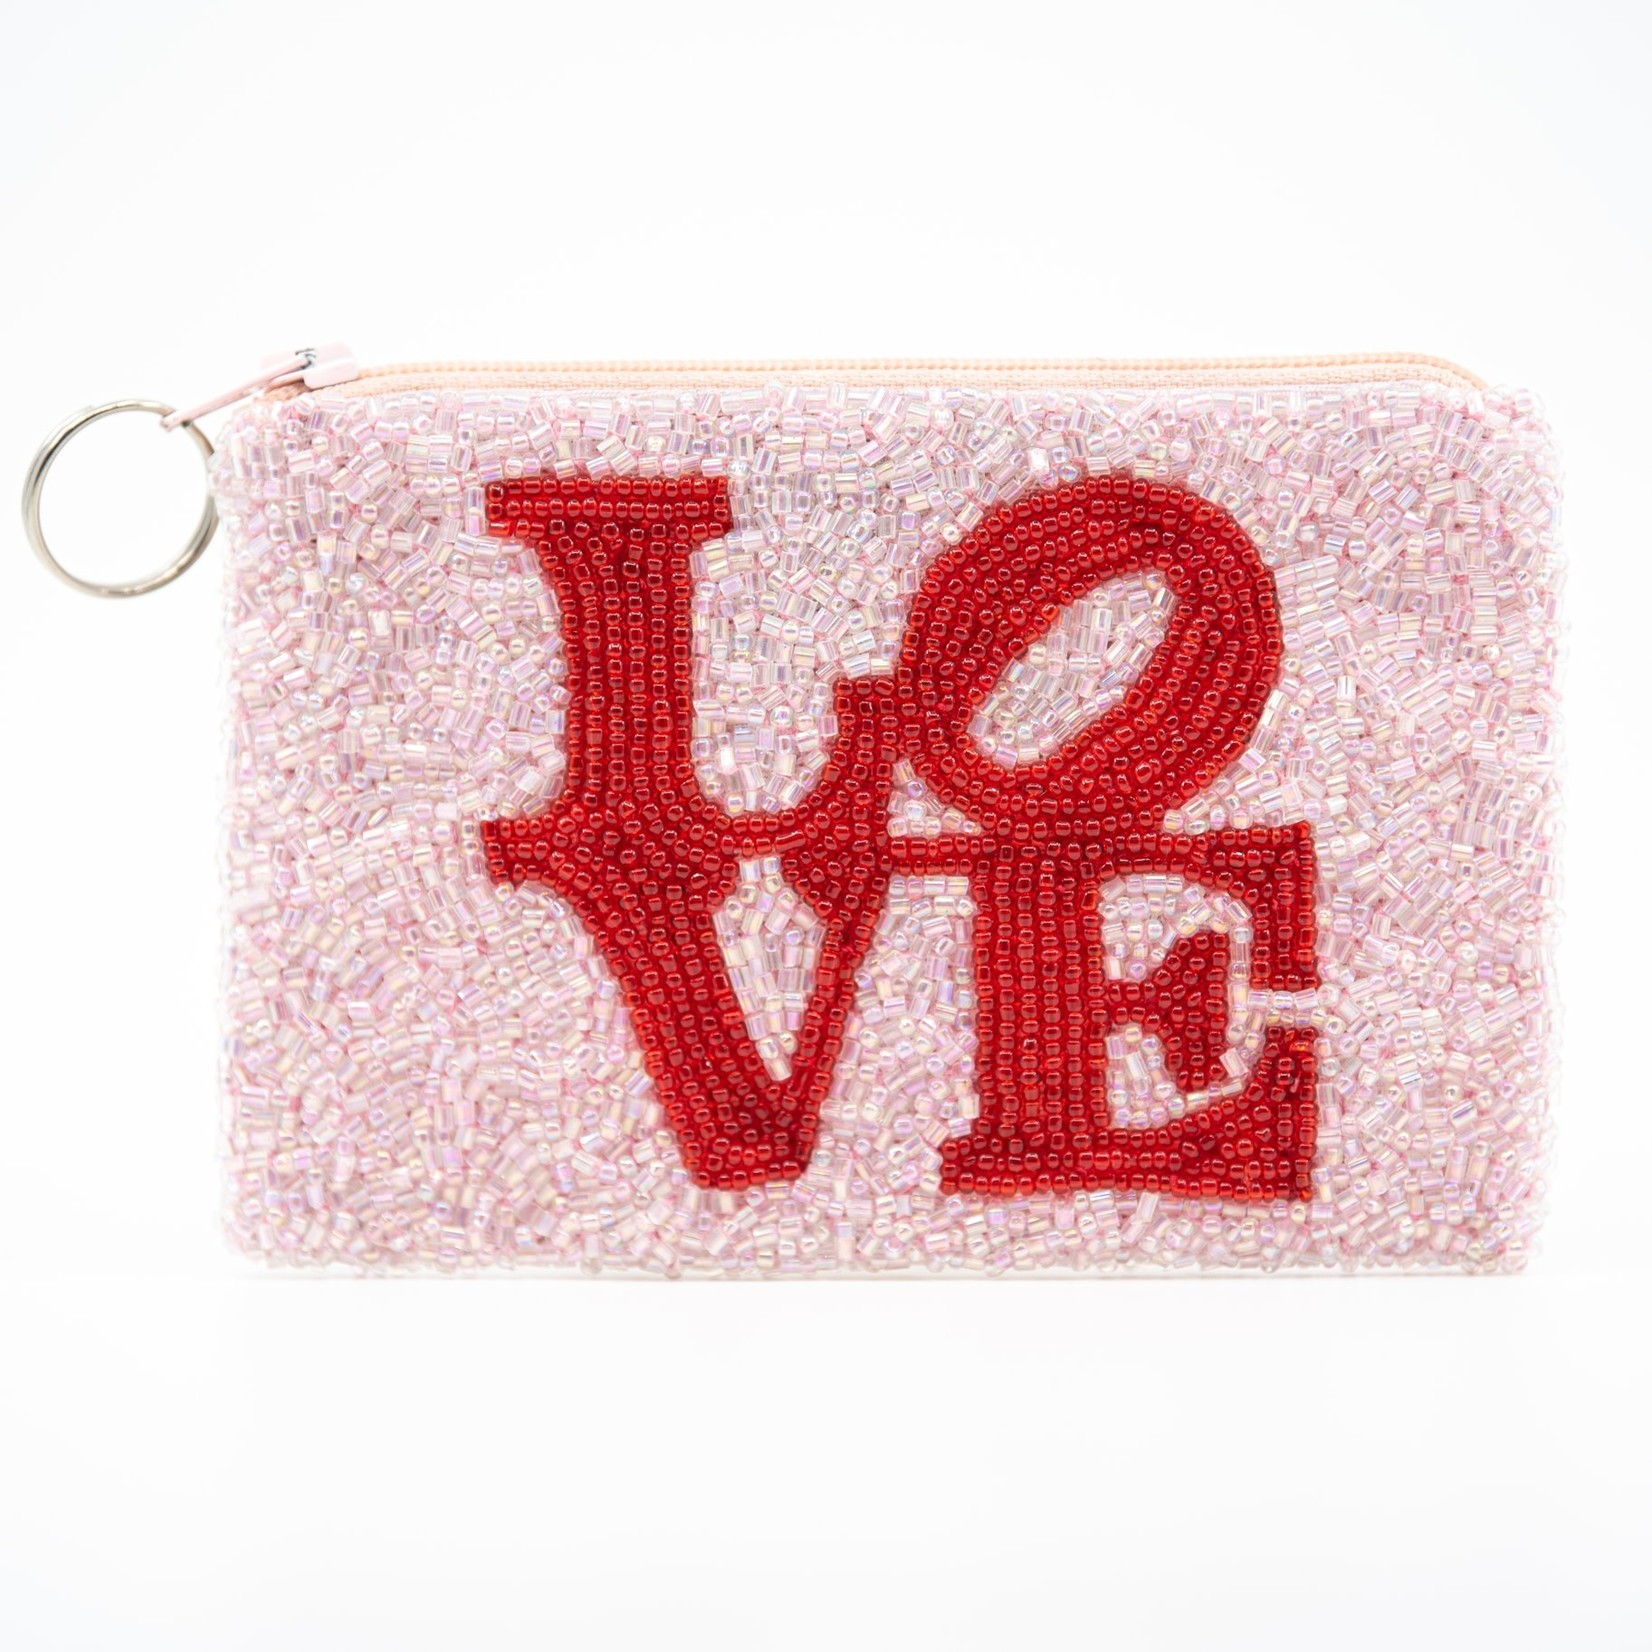 Tiana Love coin purse -Red on Soft Pink